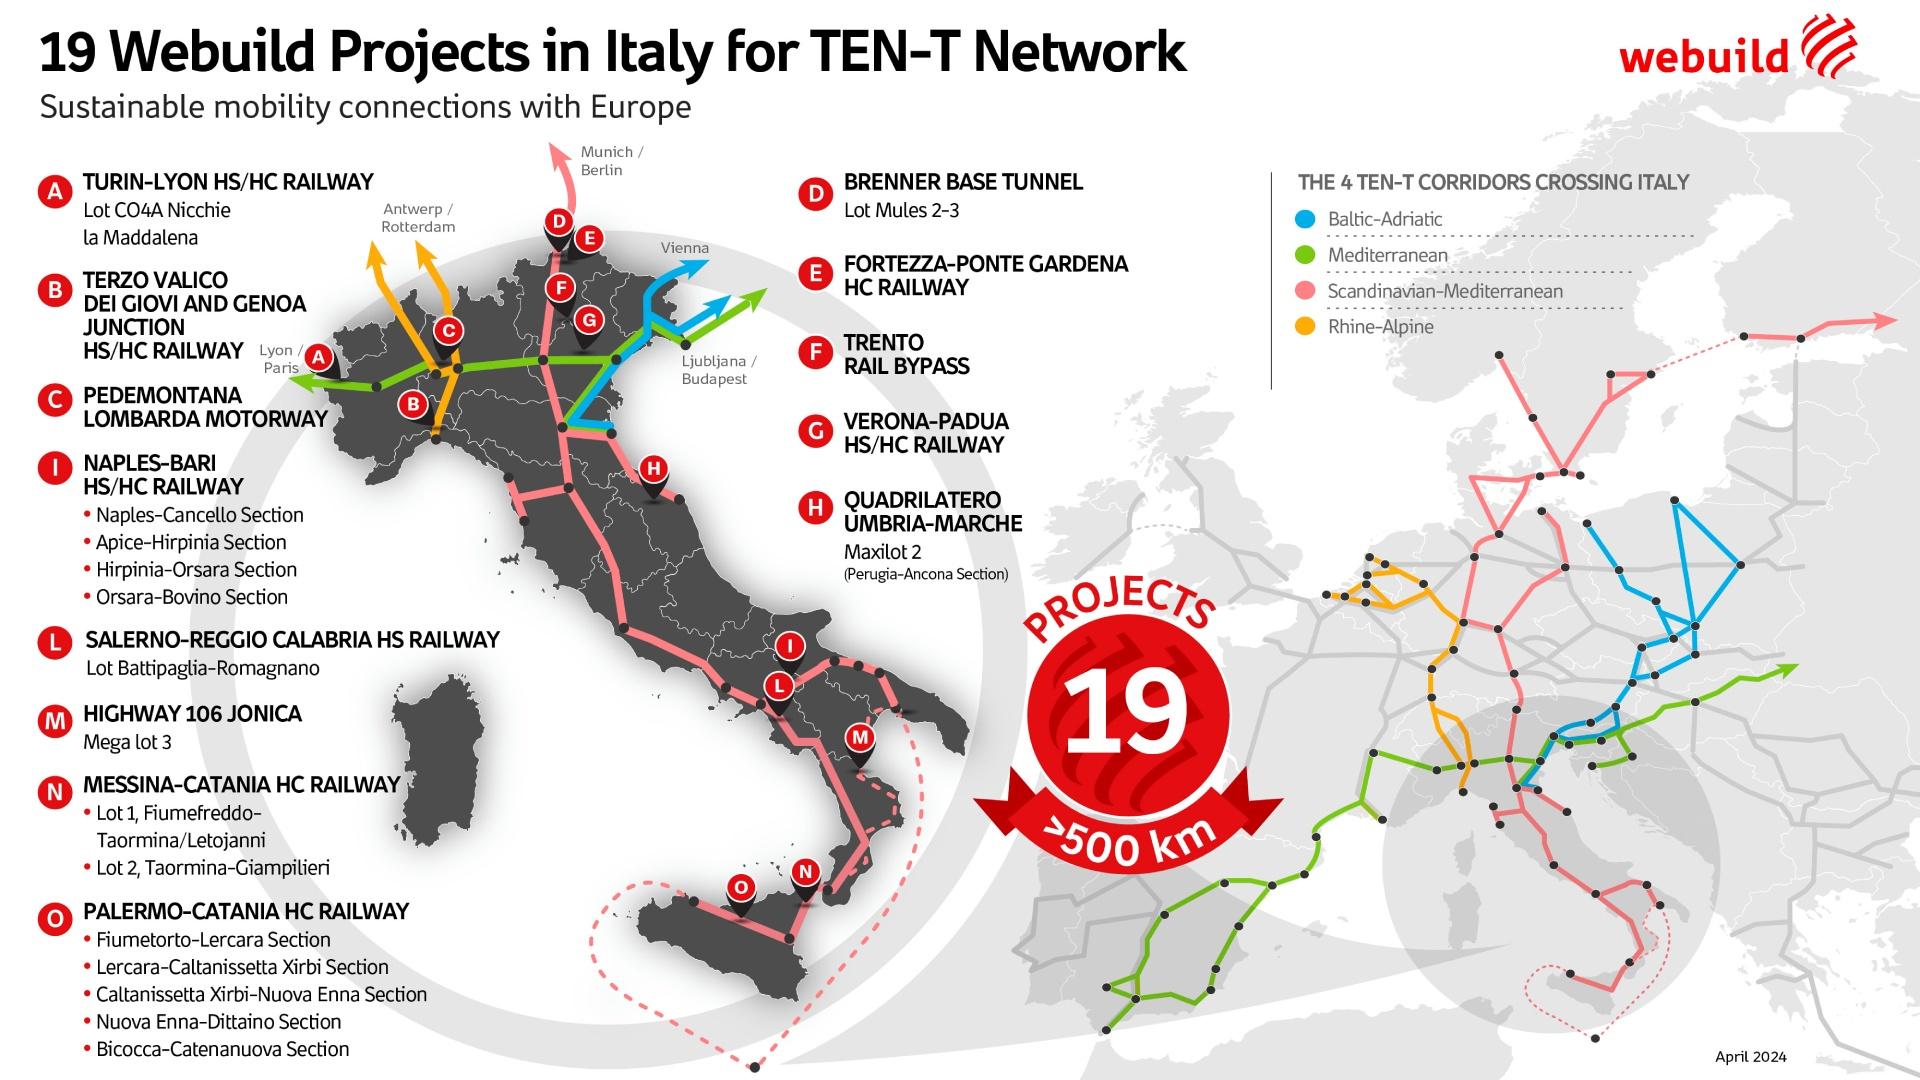 19 Webuild Projects in Italy for TEN-T Network